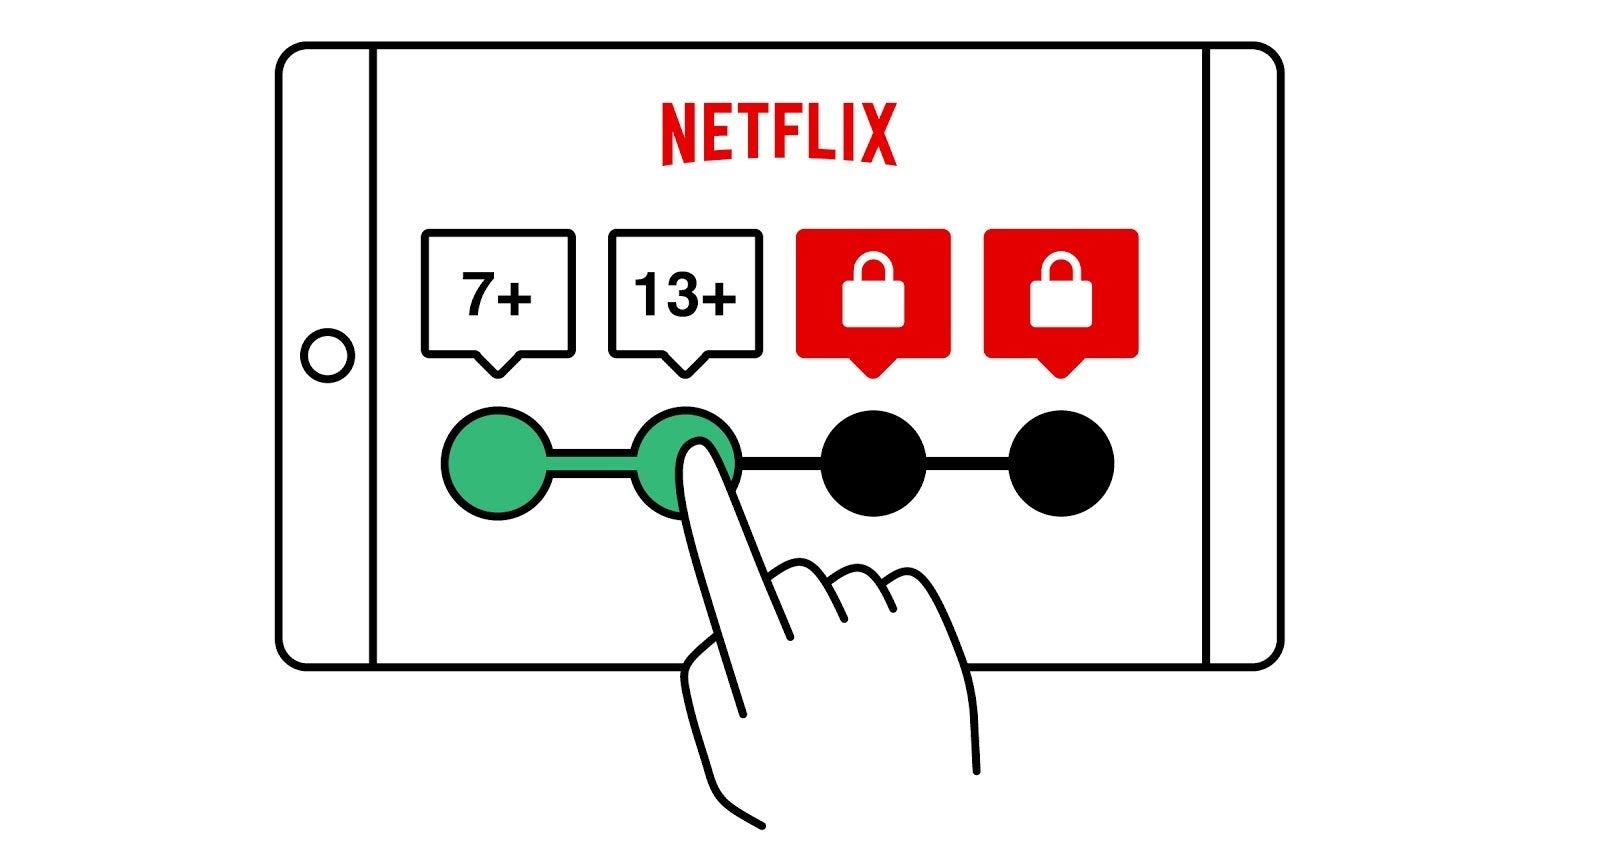 Netflix adds a profile PIN option to protect kids